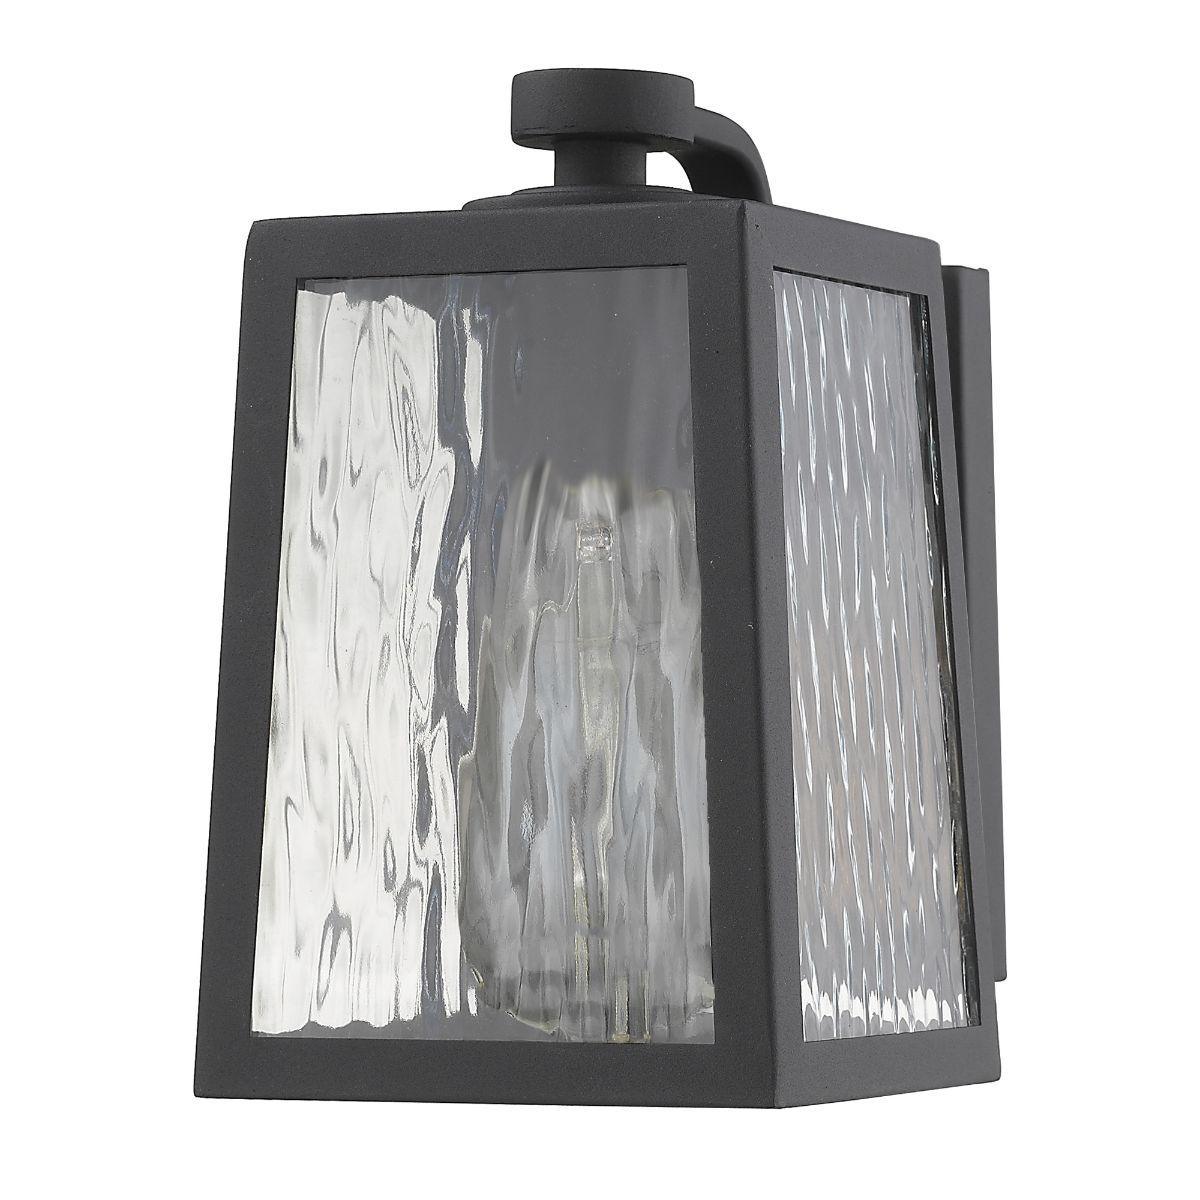 Hirche 8 In. Outdoor Wall Light Black Finish